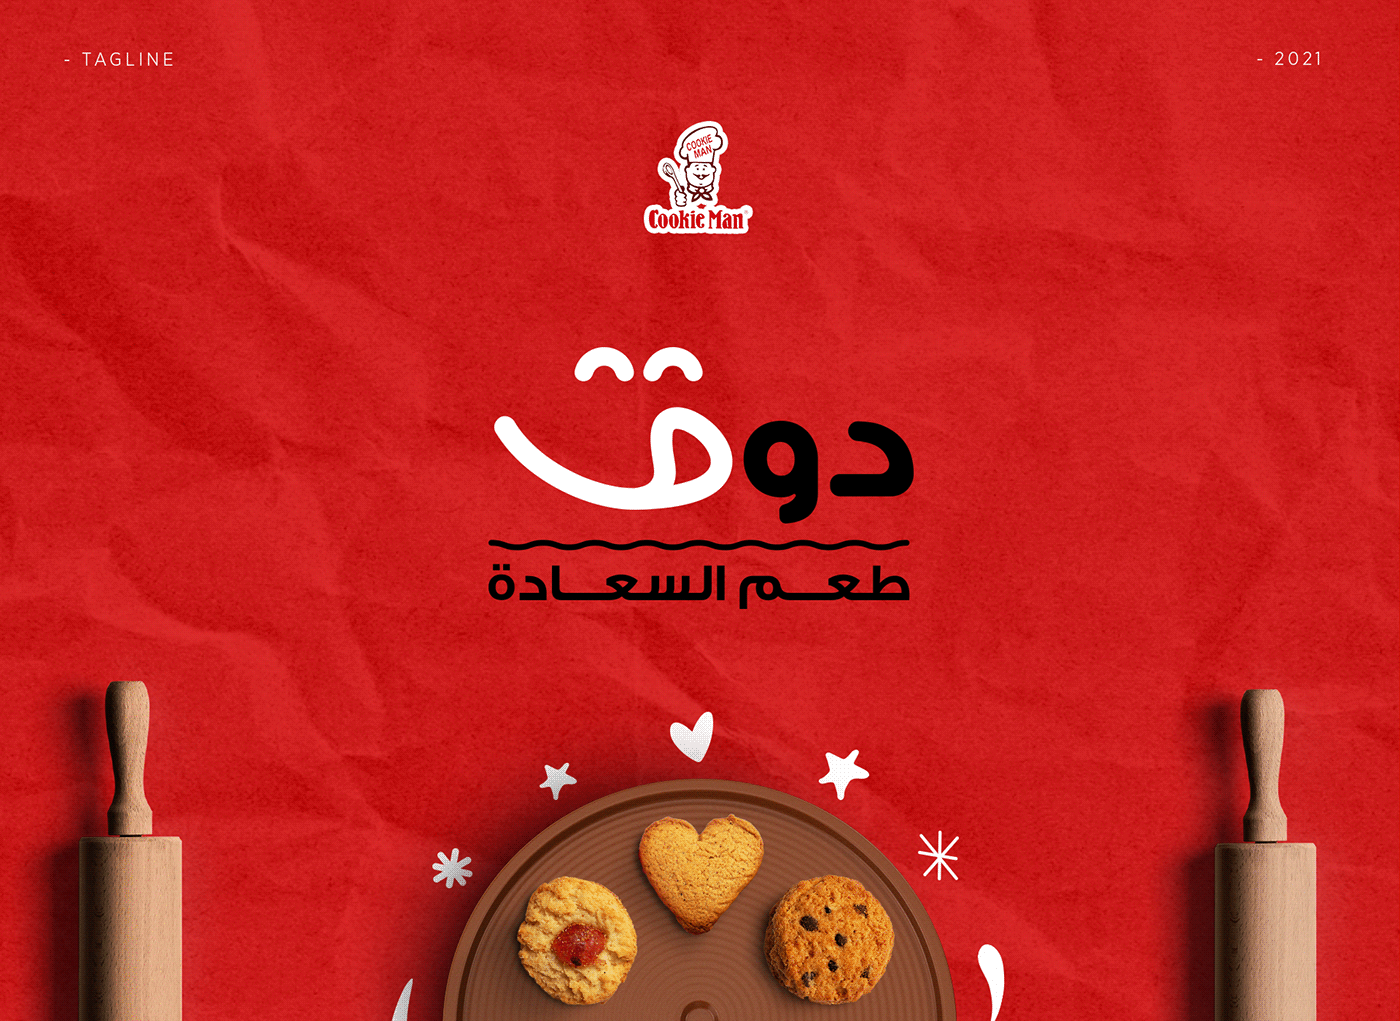 ads Advertising  bakery cookies Food  Social media post visual identity graphic design  creative design